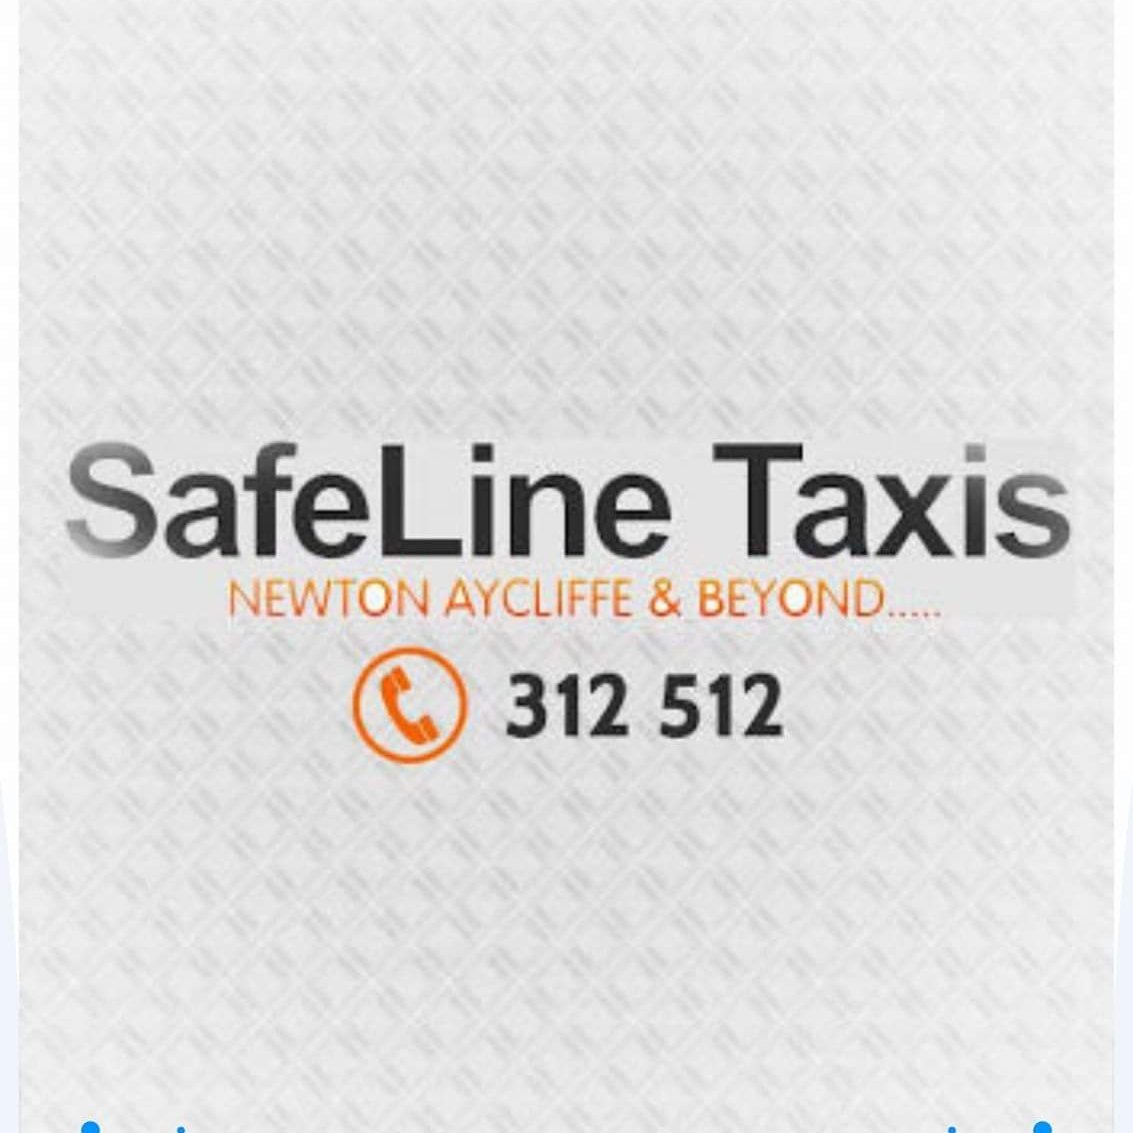 Safeline Taxi's
Family business in Newton Aycliffe.
Catering for all needs, from Airport to Town and anything inbetween